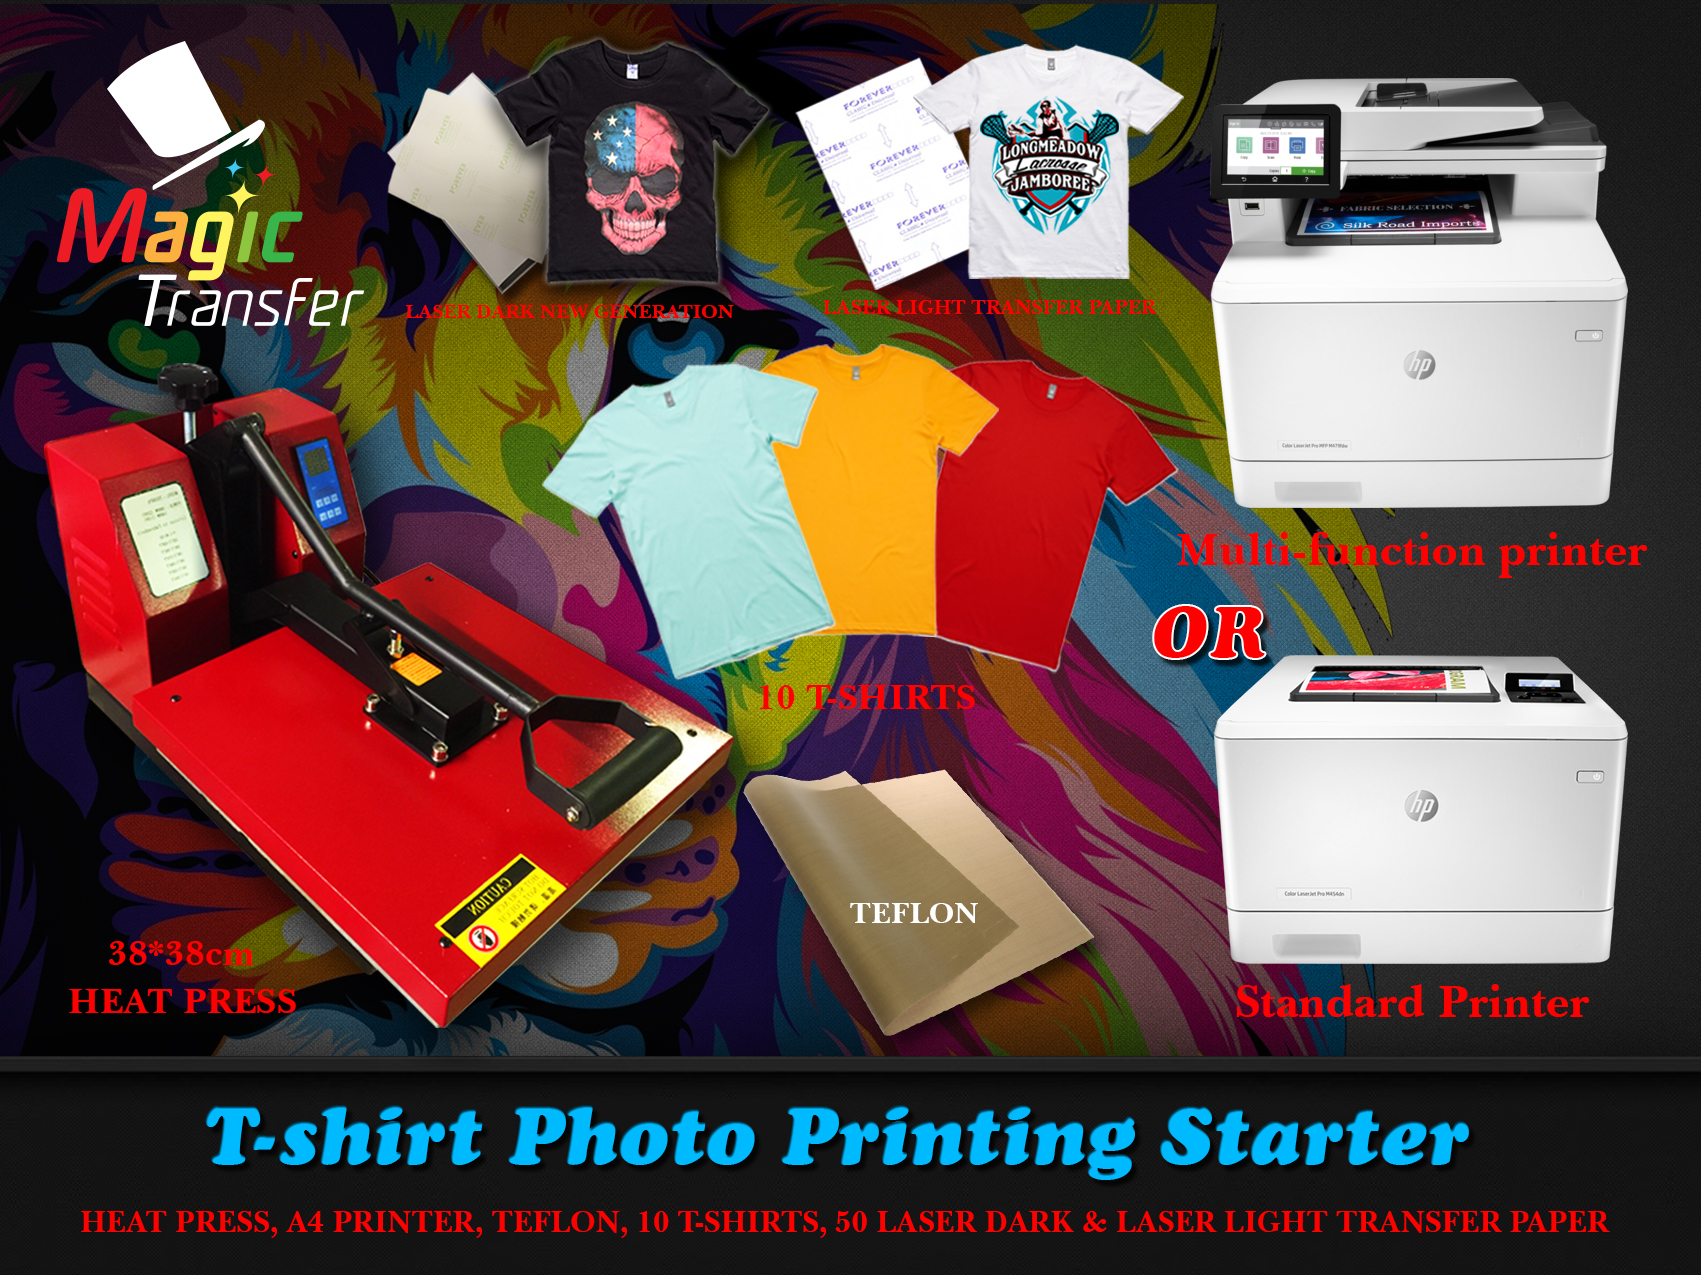 T-Shirt Photo Printing Starter with A4 printer